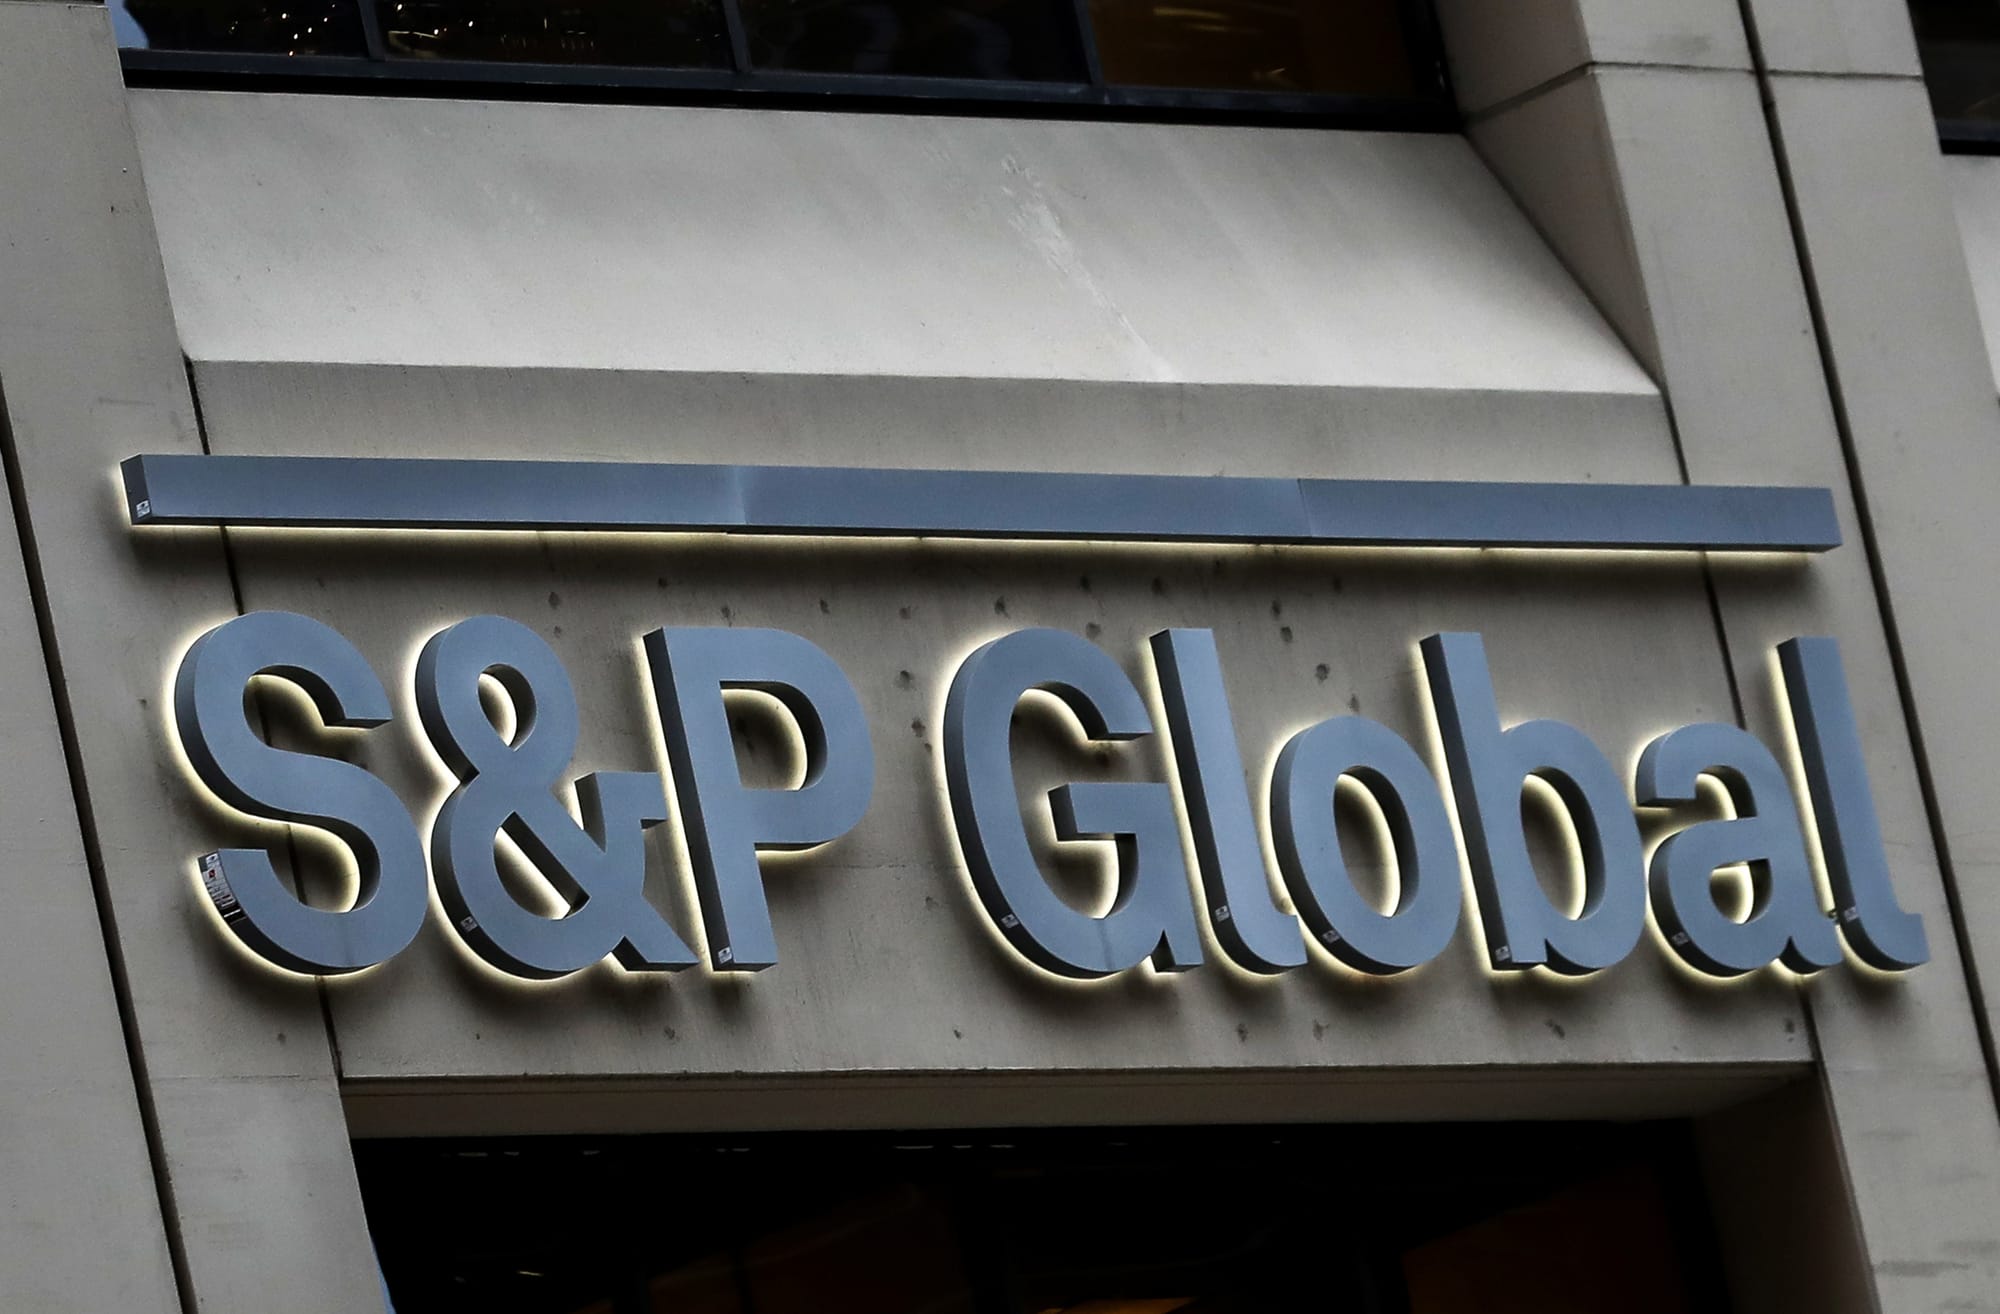 S&P Global Downgrades Five US Banks, Warns Lenders Hold Billions of Dollars in Loans That May Face ‘Material Deterioration’